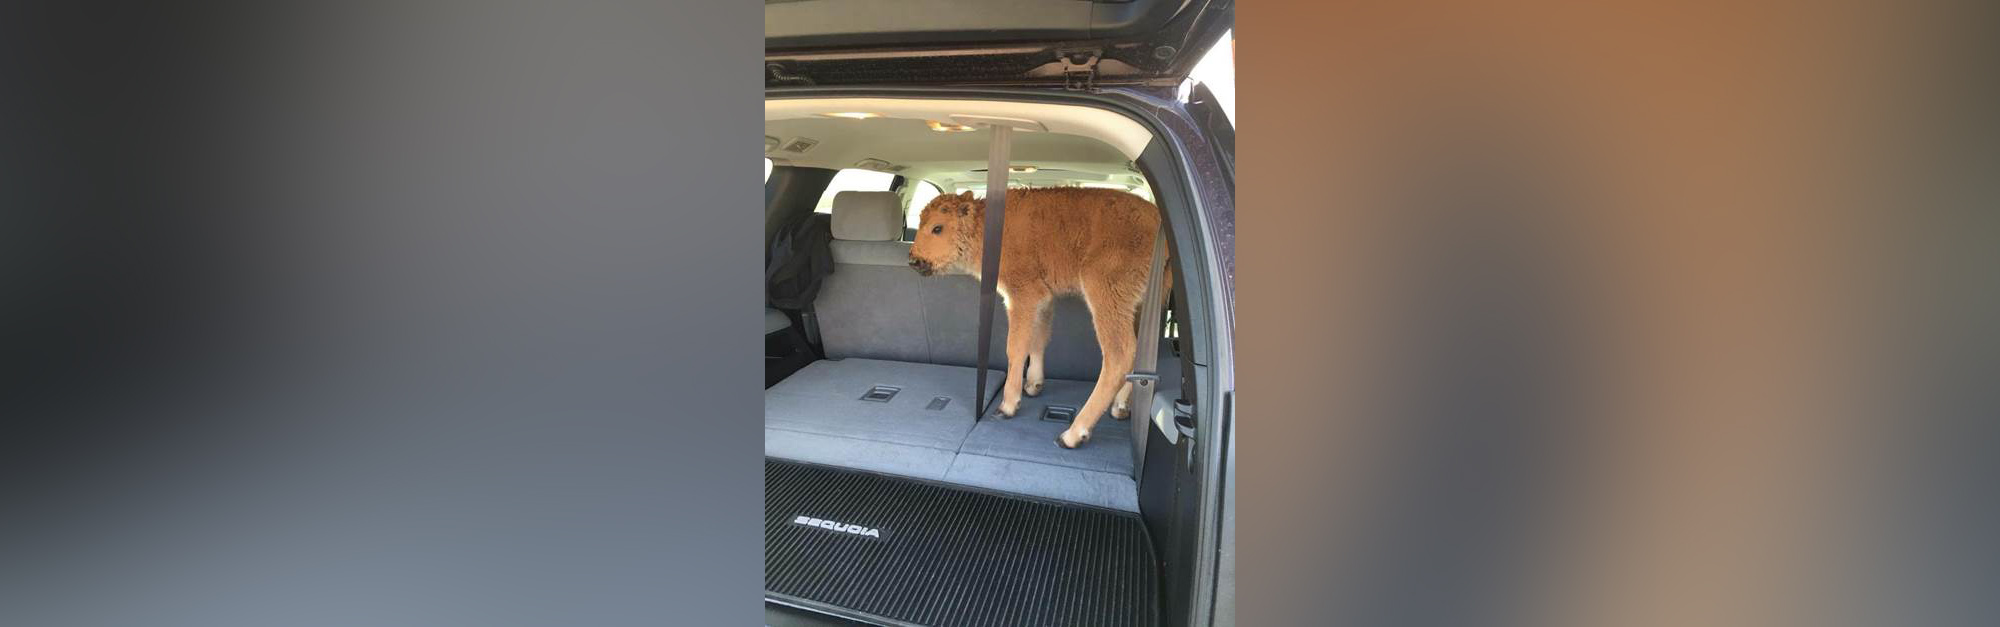 PHOTO: A baby bison that was photographed in an SUV last week has been euthanized by the National Park Service after its herd failed to accept it back.